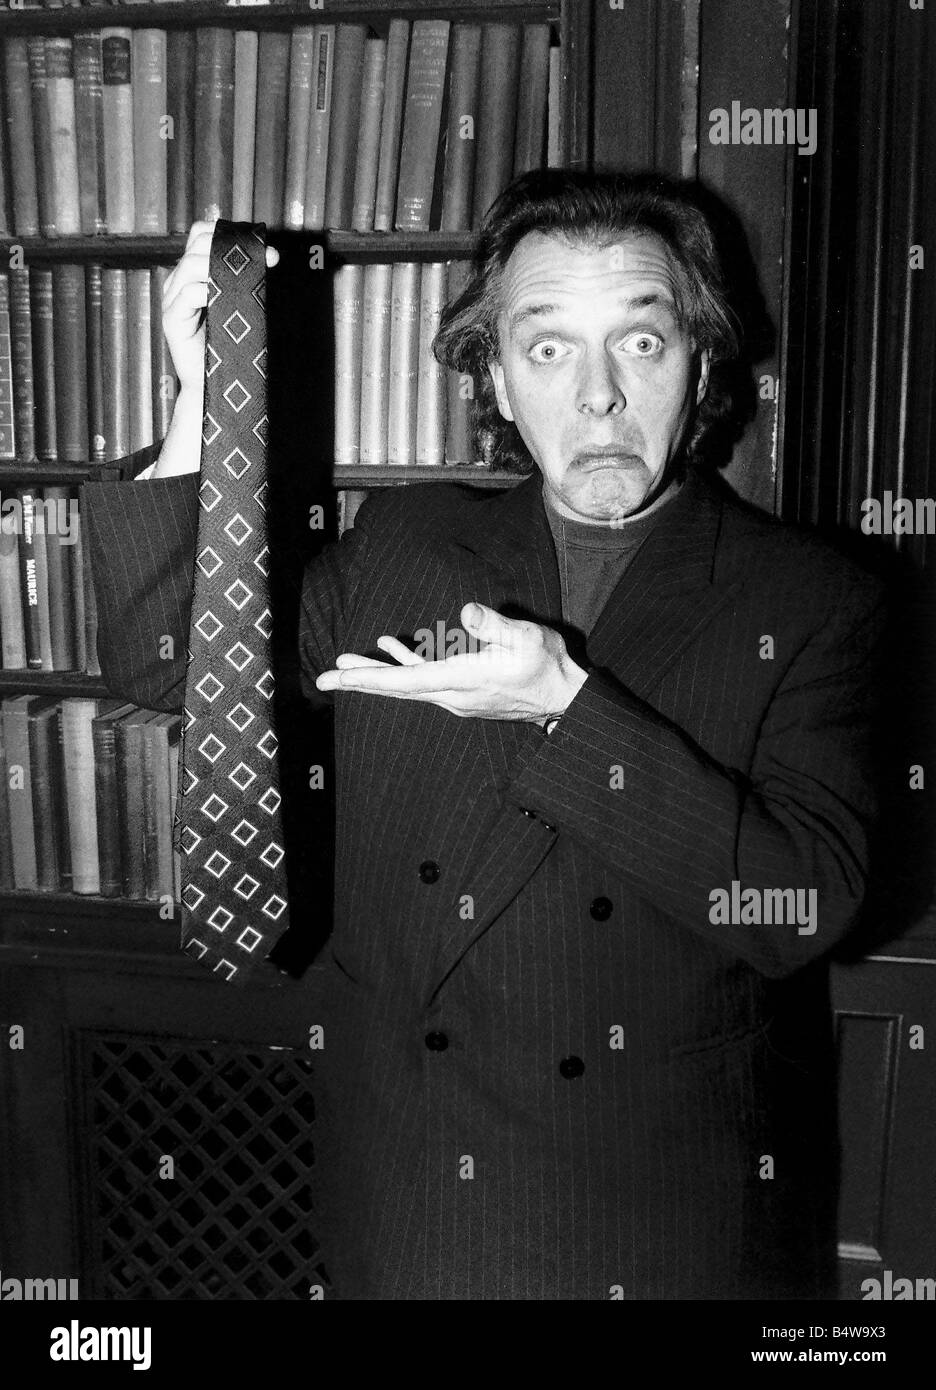 Rik Mayall holding up a tie Making a funny face January 1989 Stock Photo